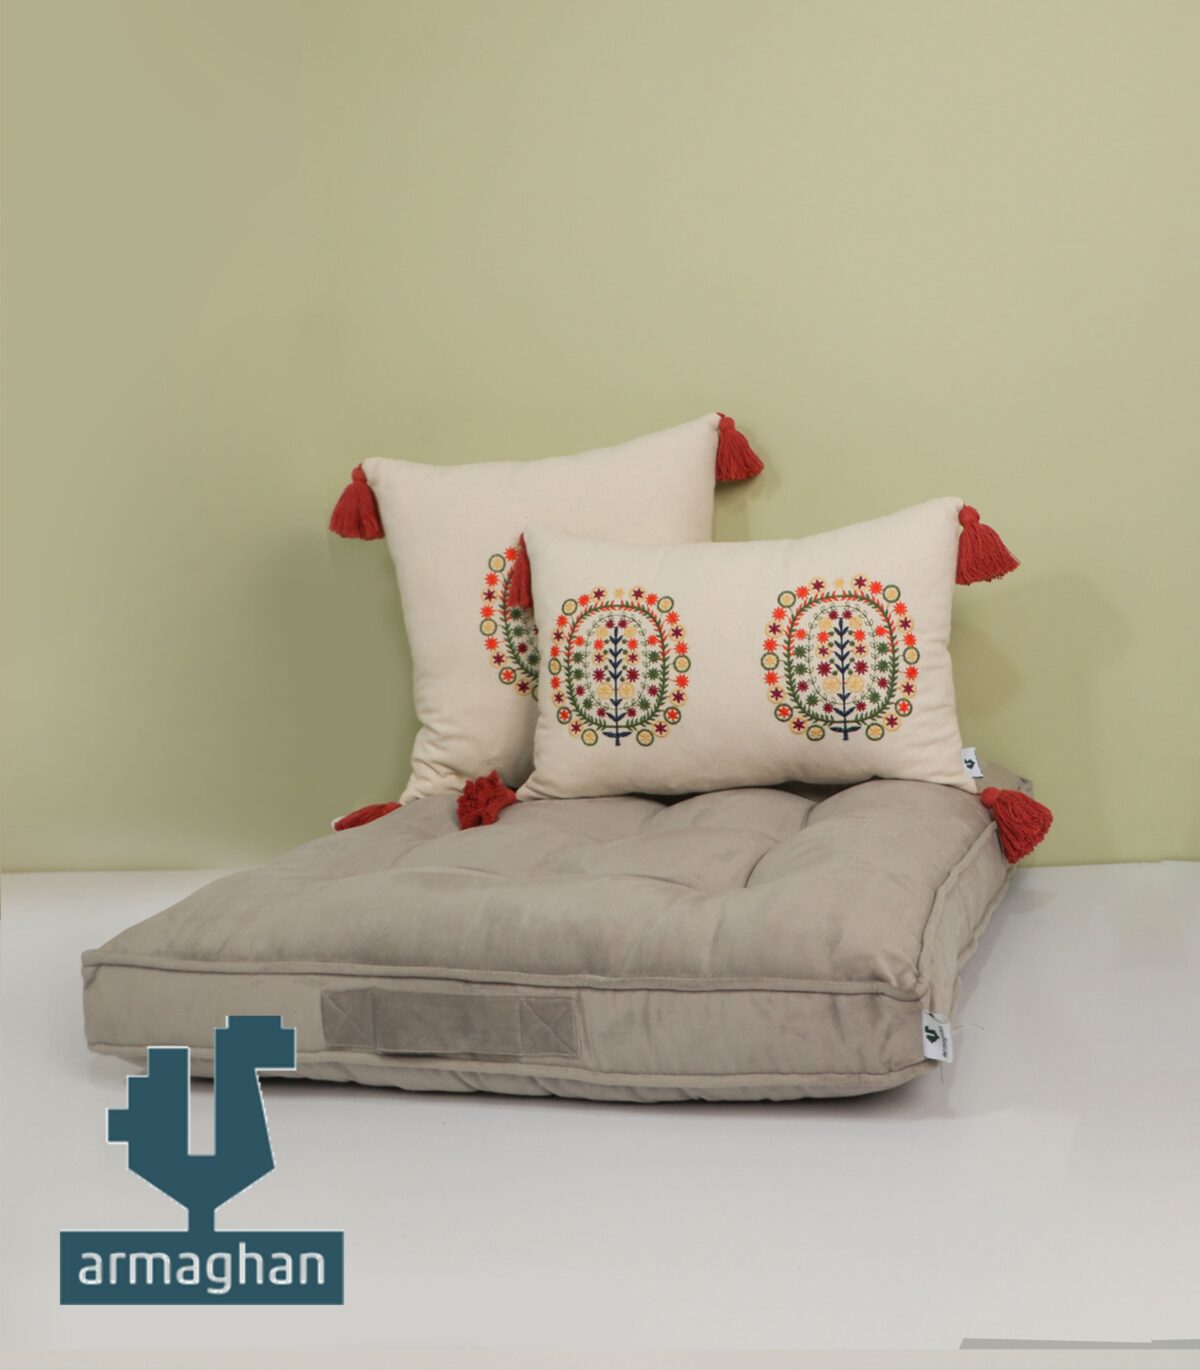 Pomegranate embroidery cushions2